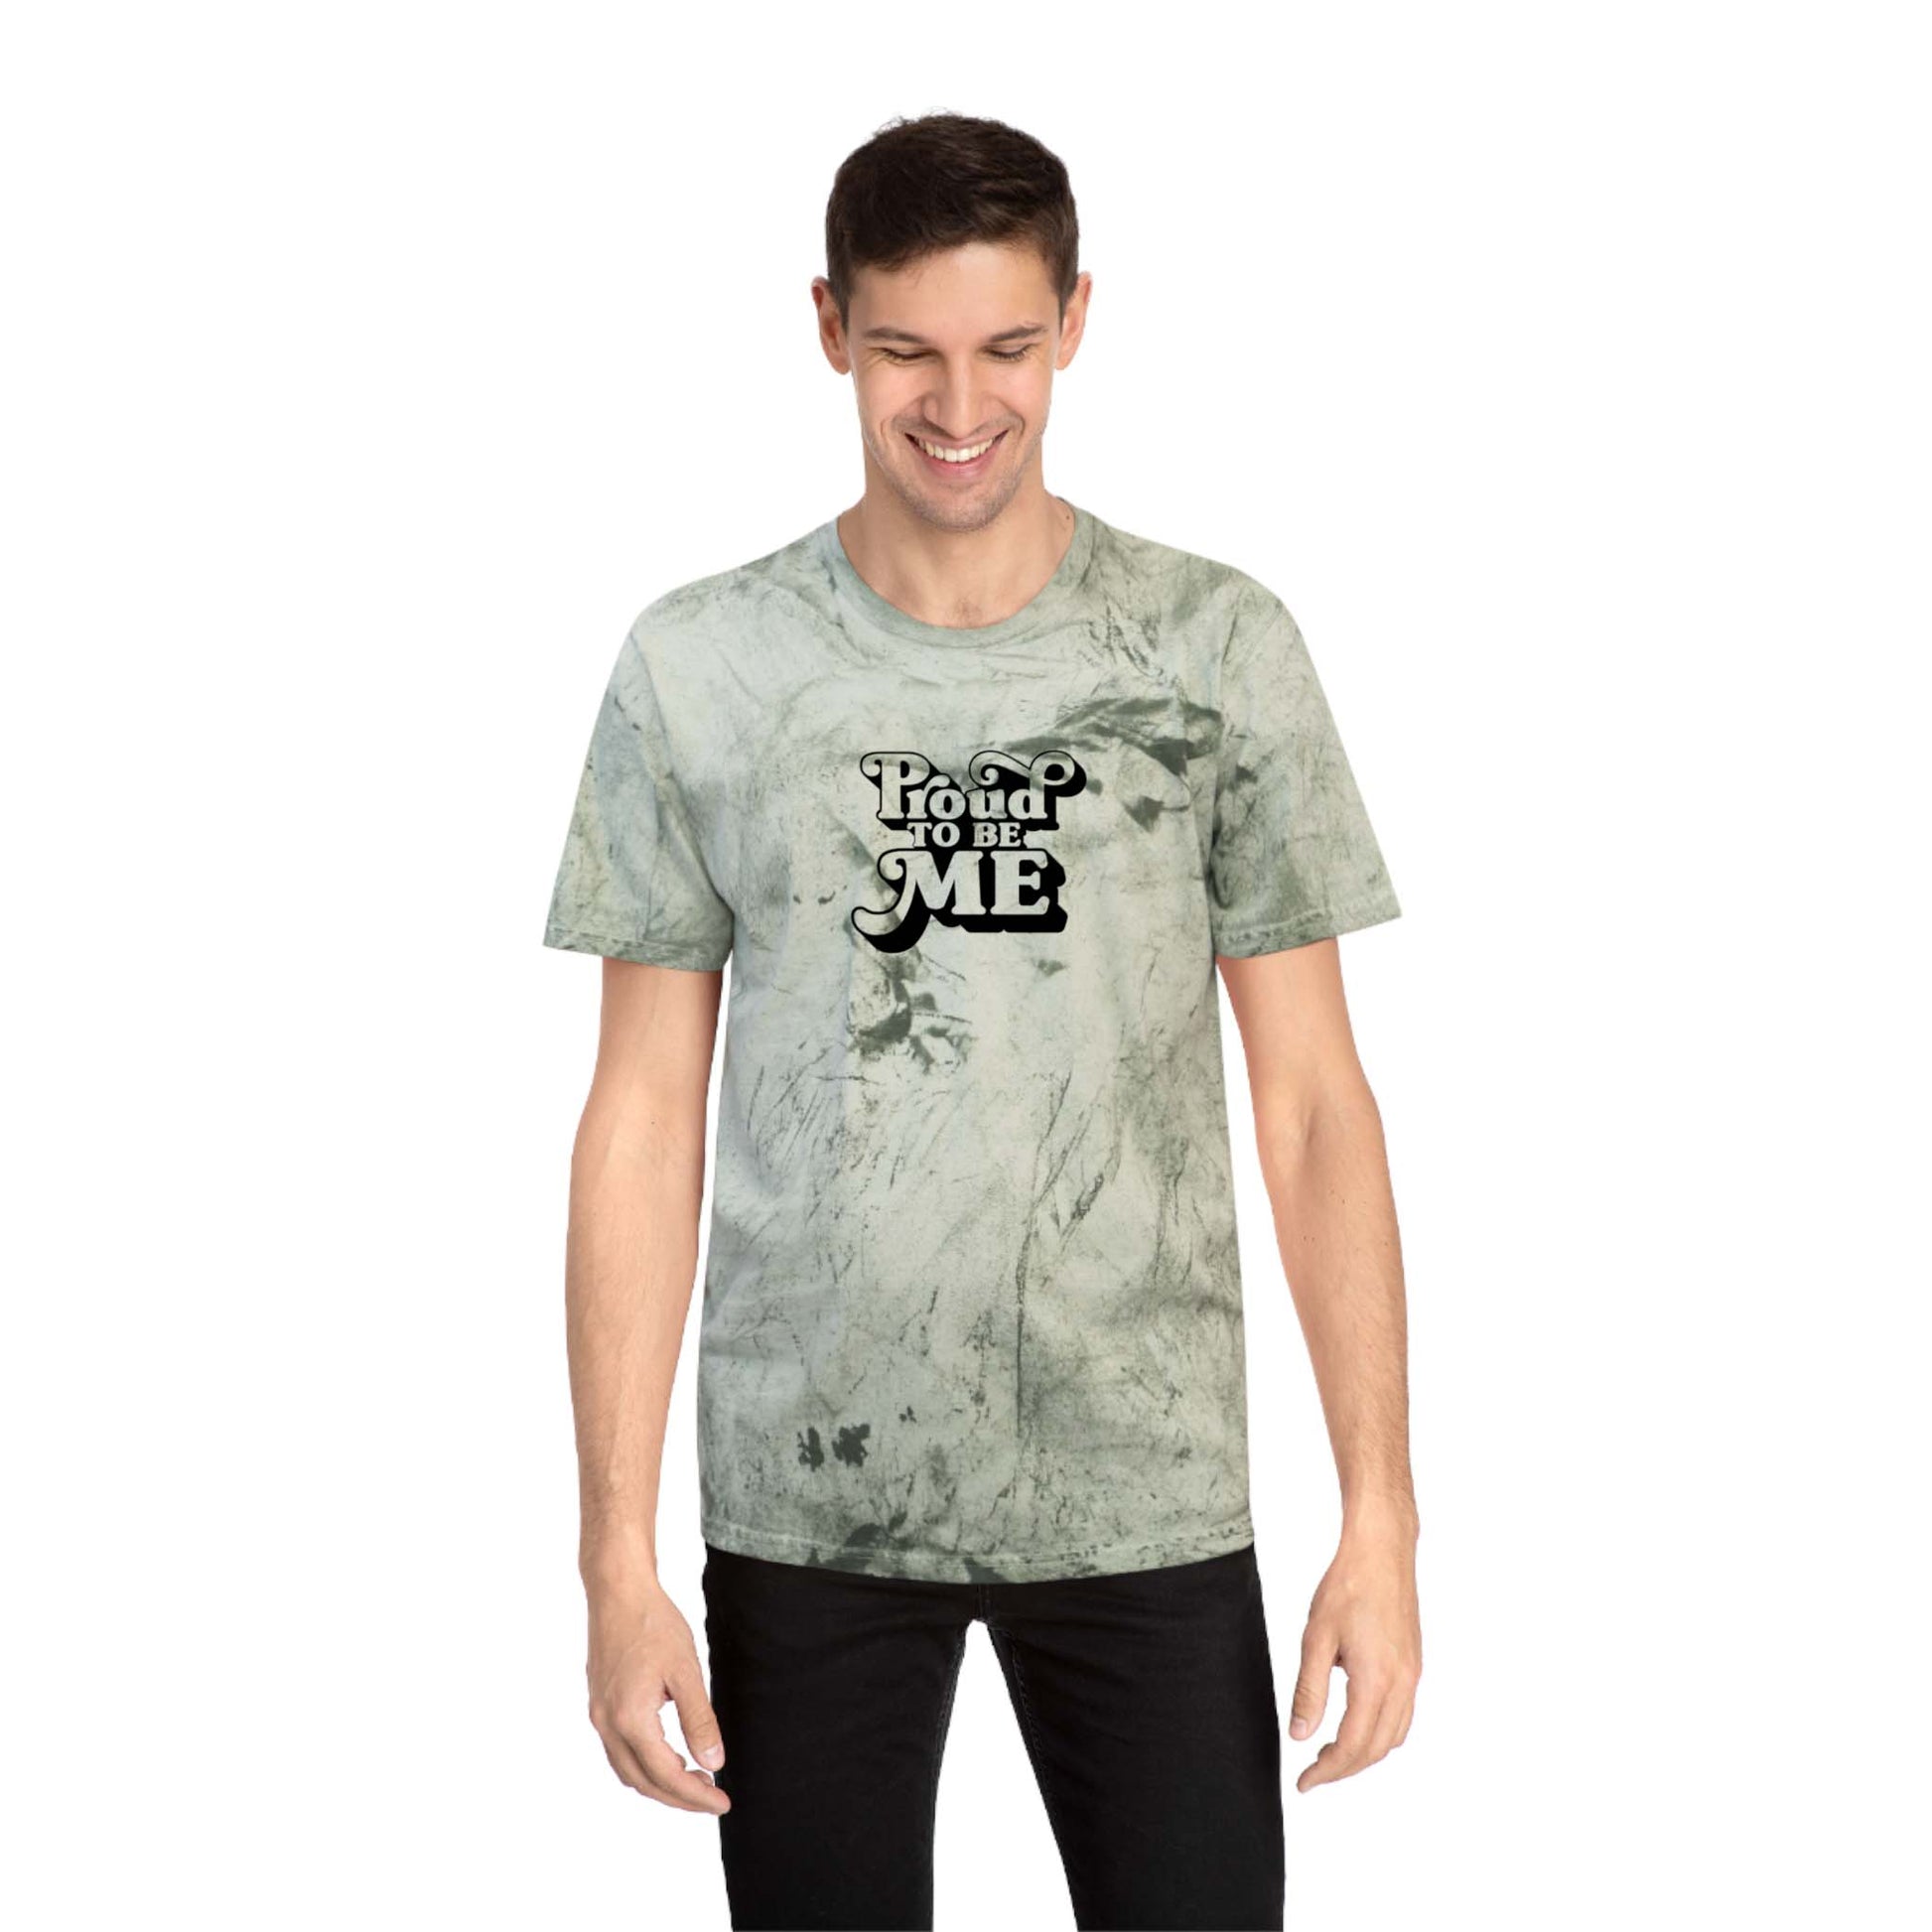 This Proud to be me T-shirt for men has a vintage look with its green color blast washy look! If you are a proud individual, this T-shirt is definitely designed for you!